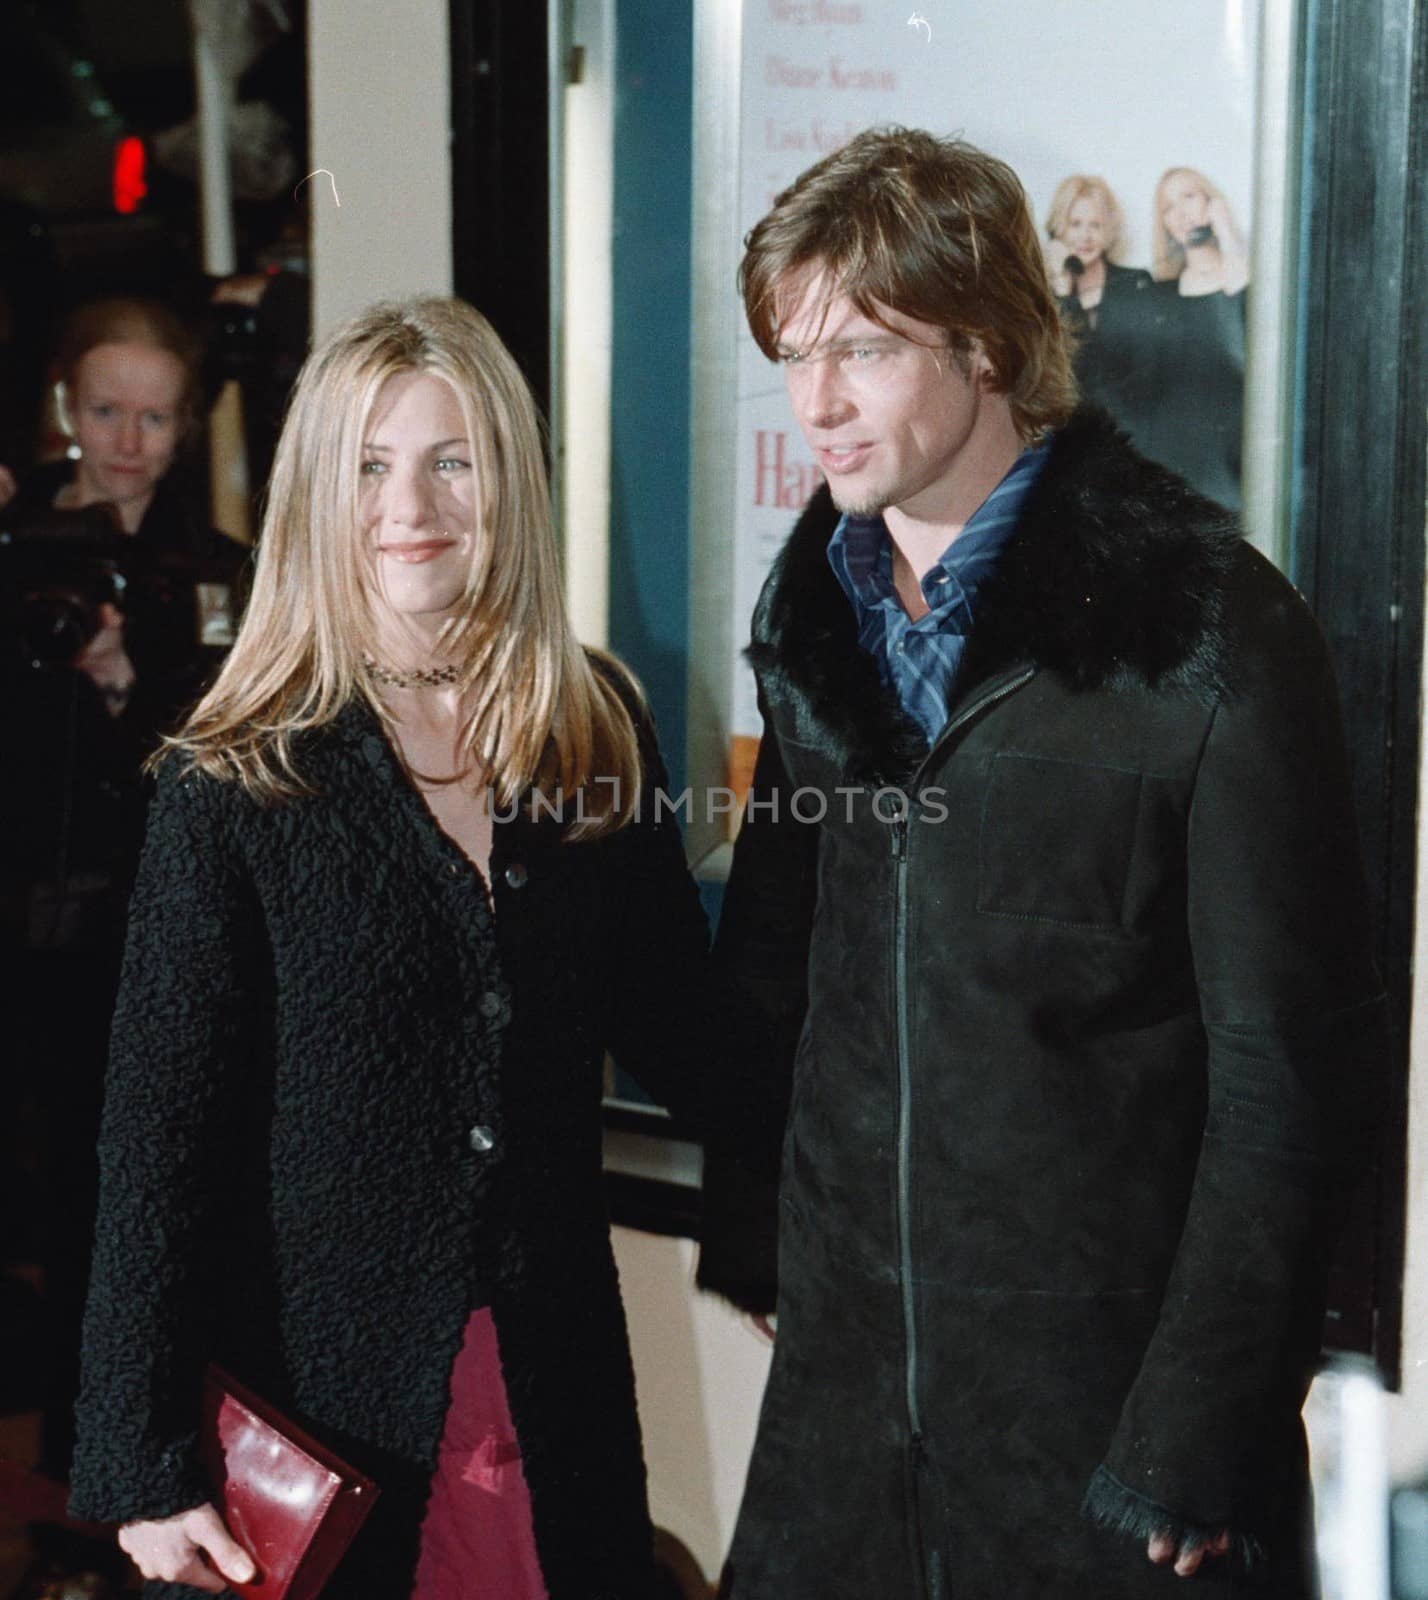 Jennifer Aniston and Brad Pitt at the premiere of Columbia Tristar's "Hanging Up" in Westwood, 02-16-00